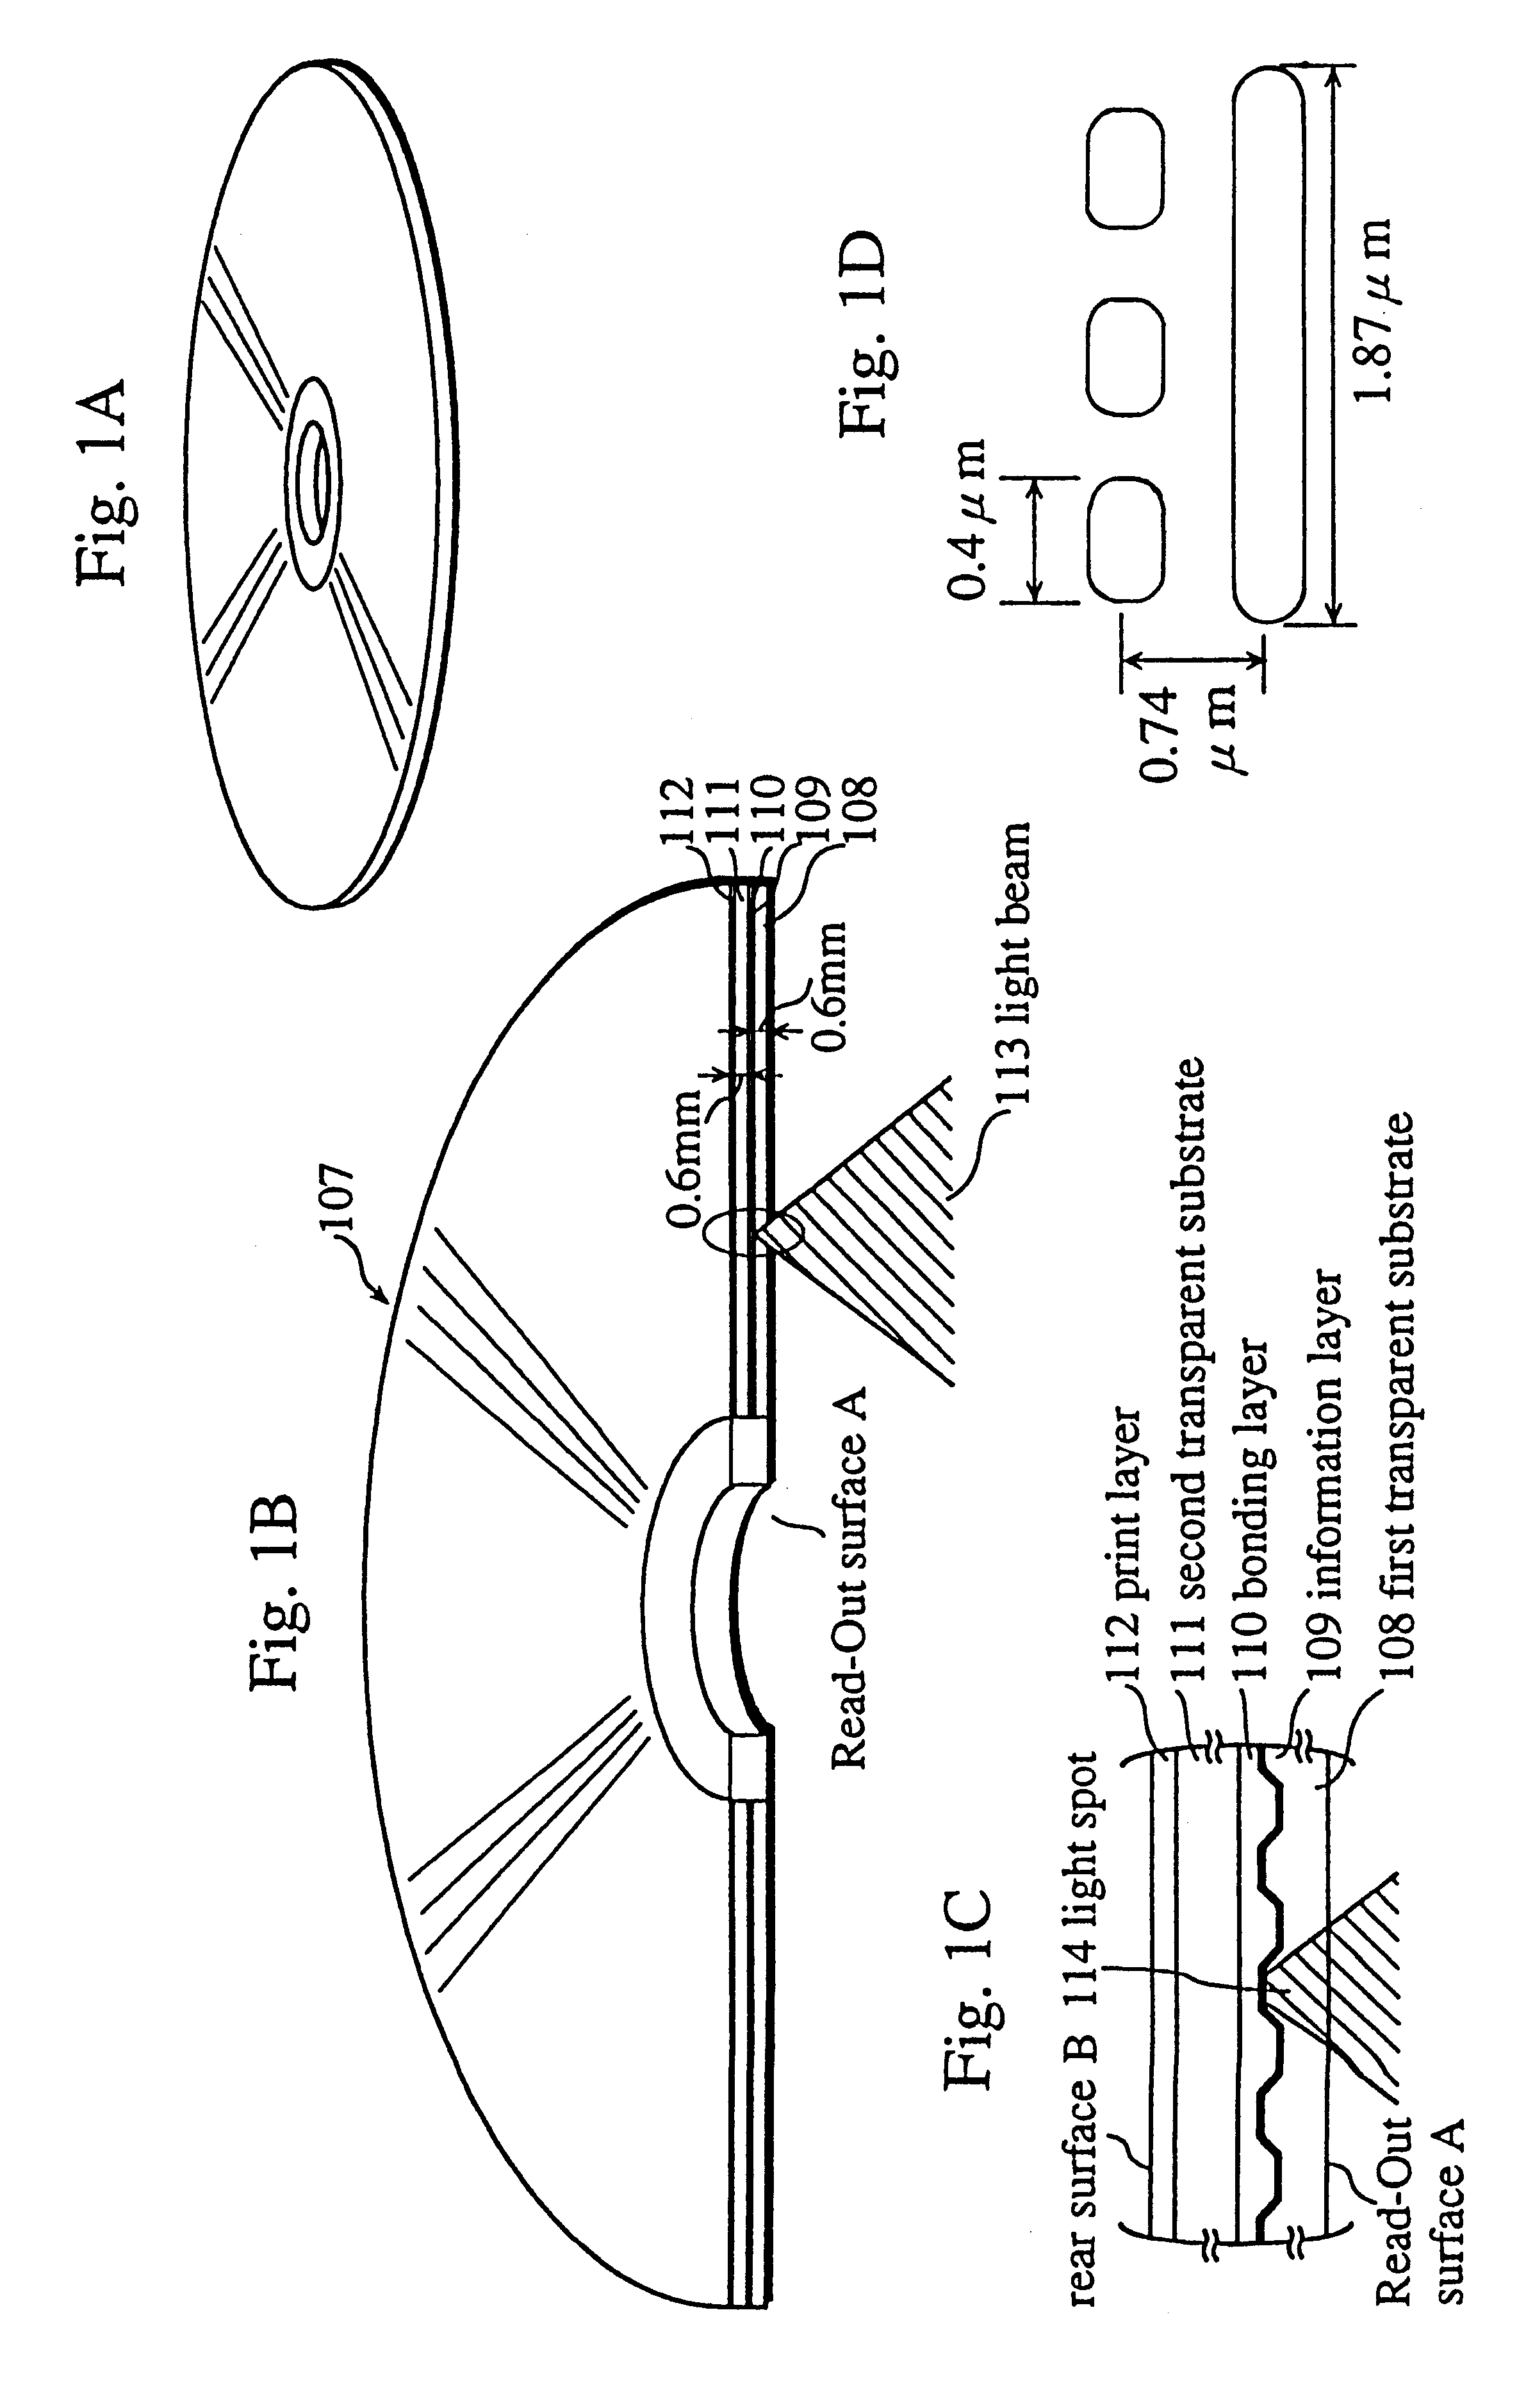 Reproduction device and method for coordinating a variable reproduction of video images